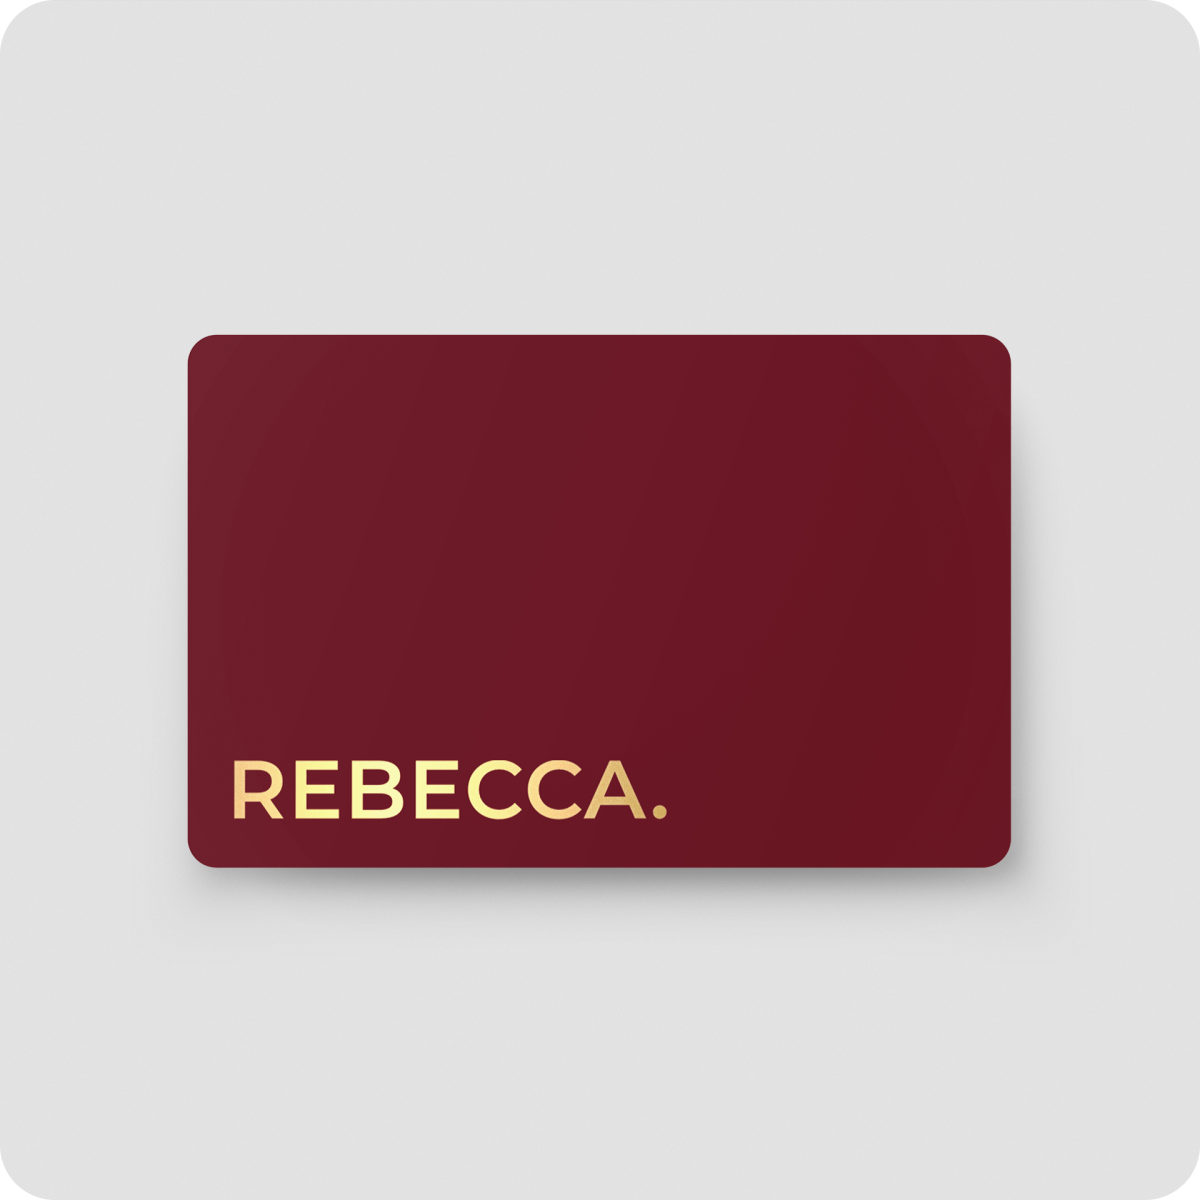 One Good Card | Smart Digital Name Card (Classic) - Personalised Near Field Communication (NFC) Business Cards designs.